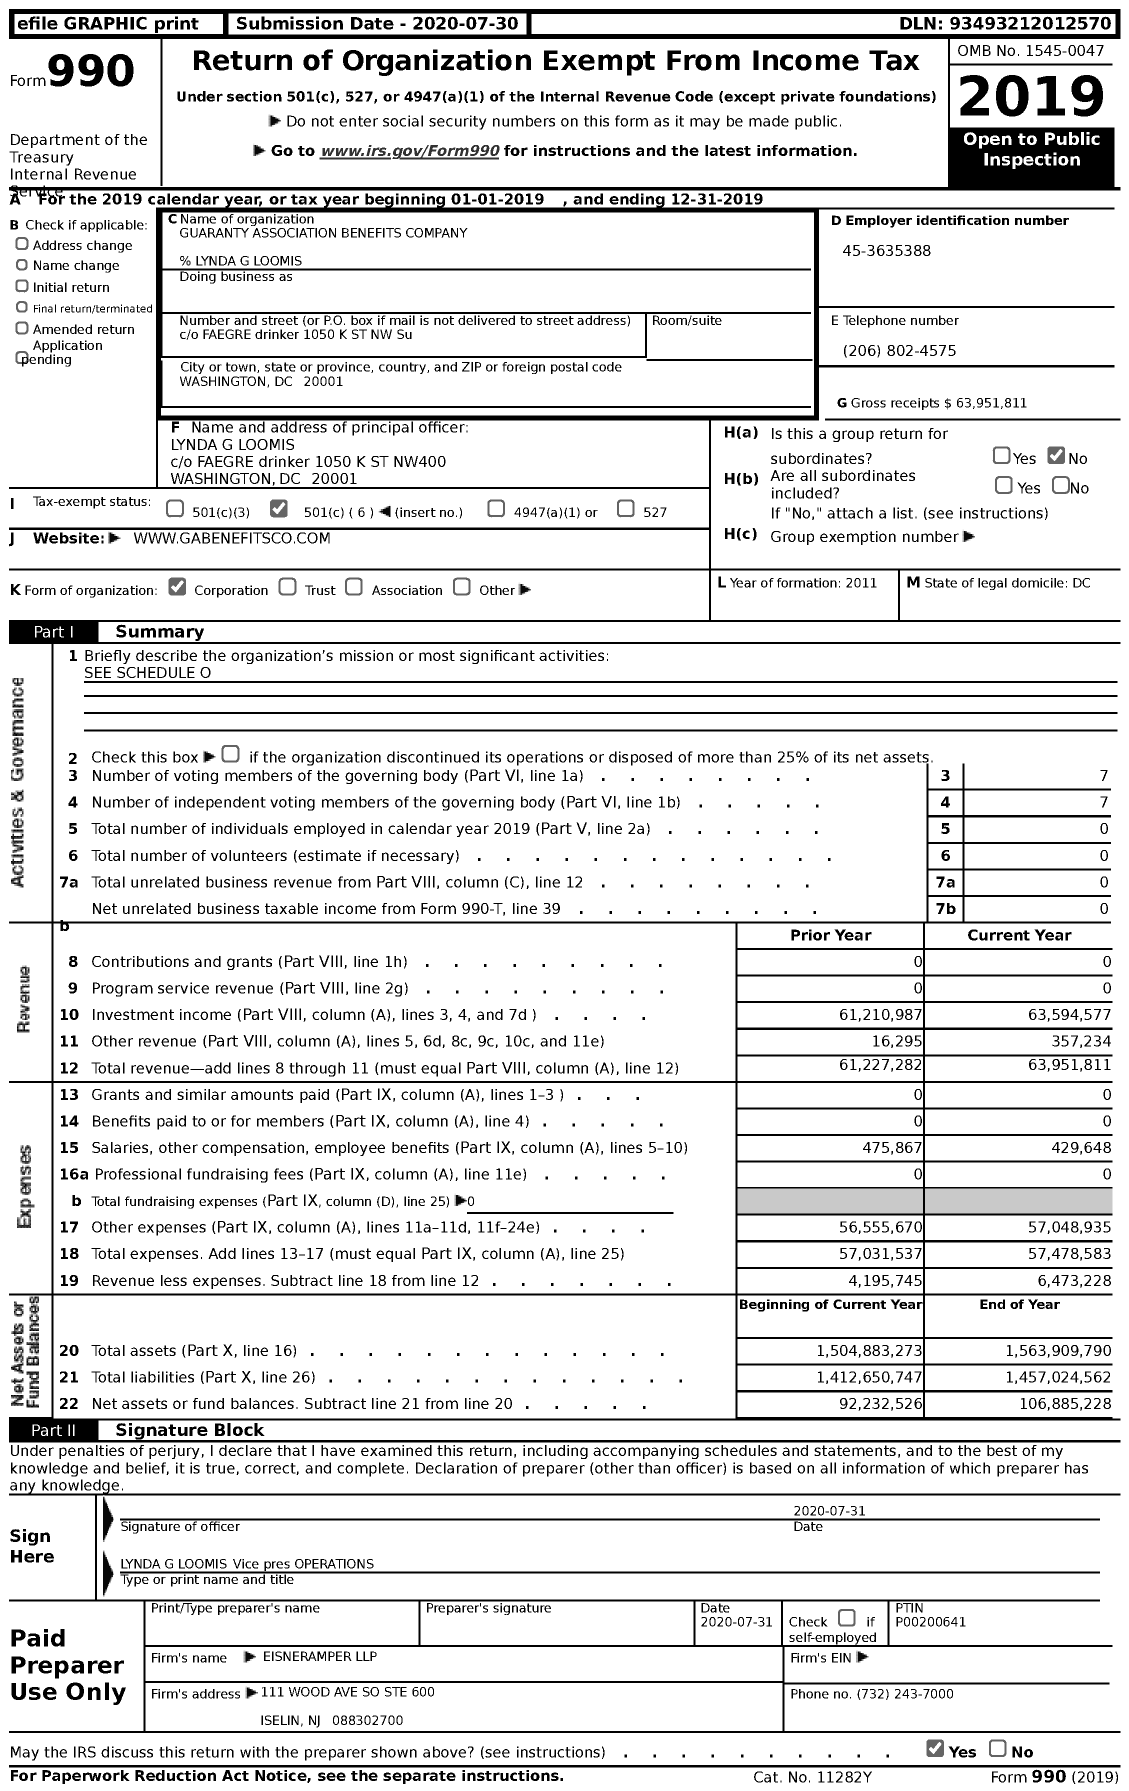 Image of first page of 2019 Form 990 for Guaranty Association Benefits Company (GABC)